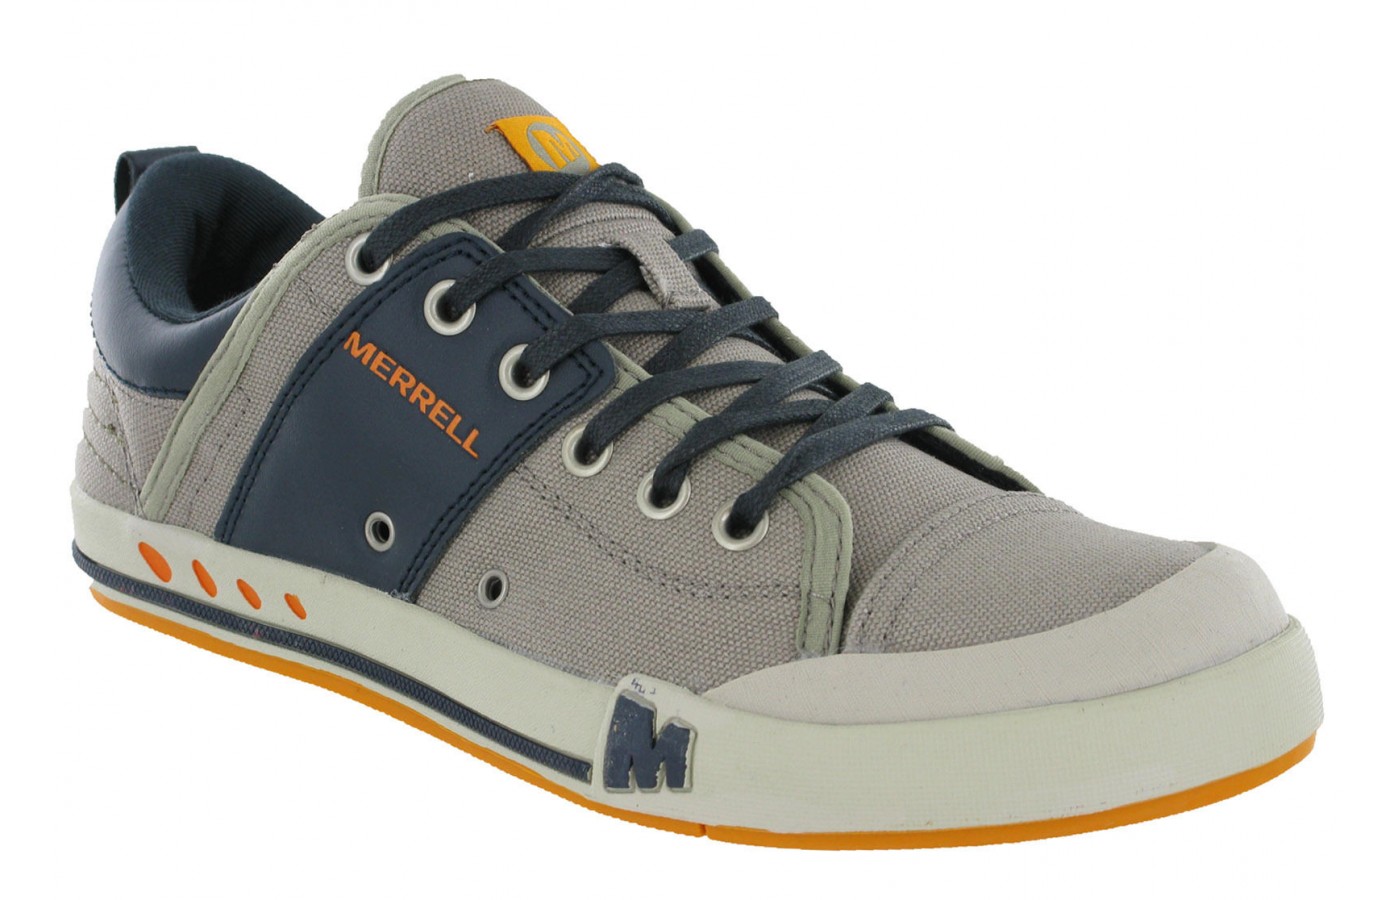 Merrell Rant Reviewed \u0026 Rated in 2020 